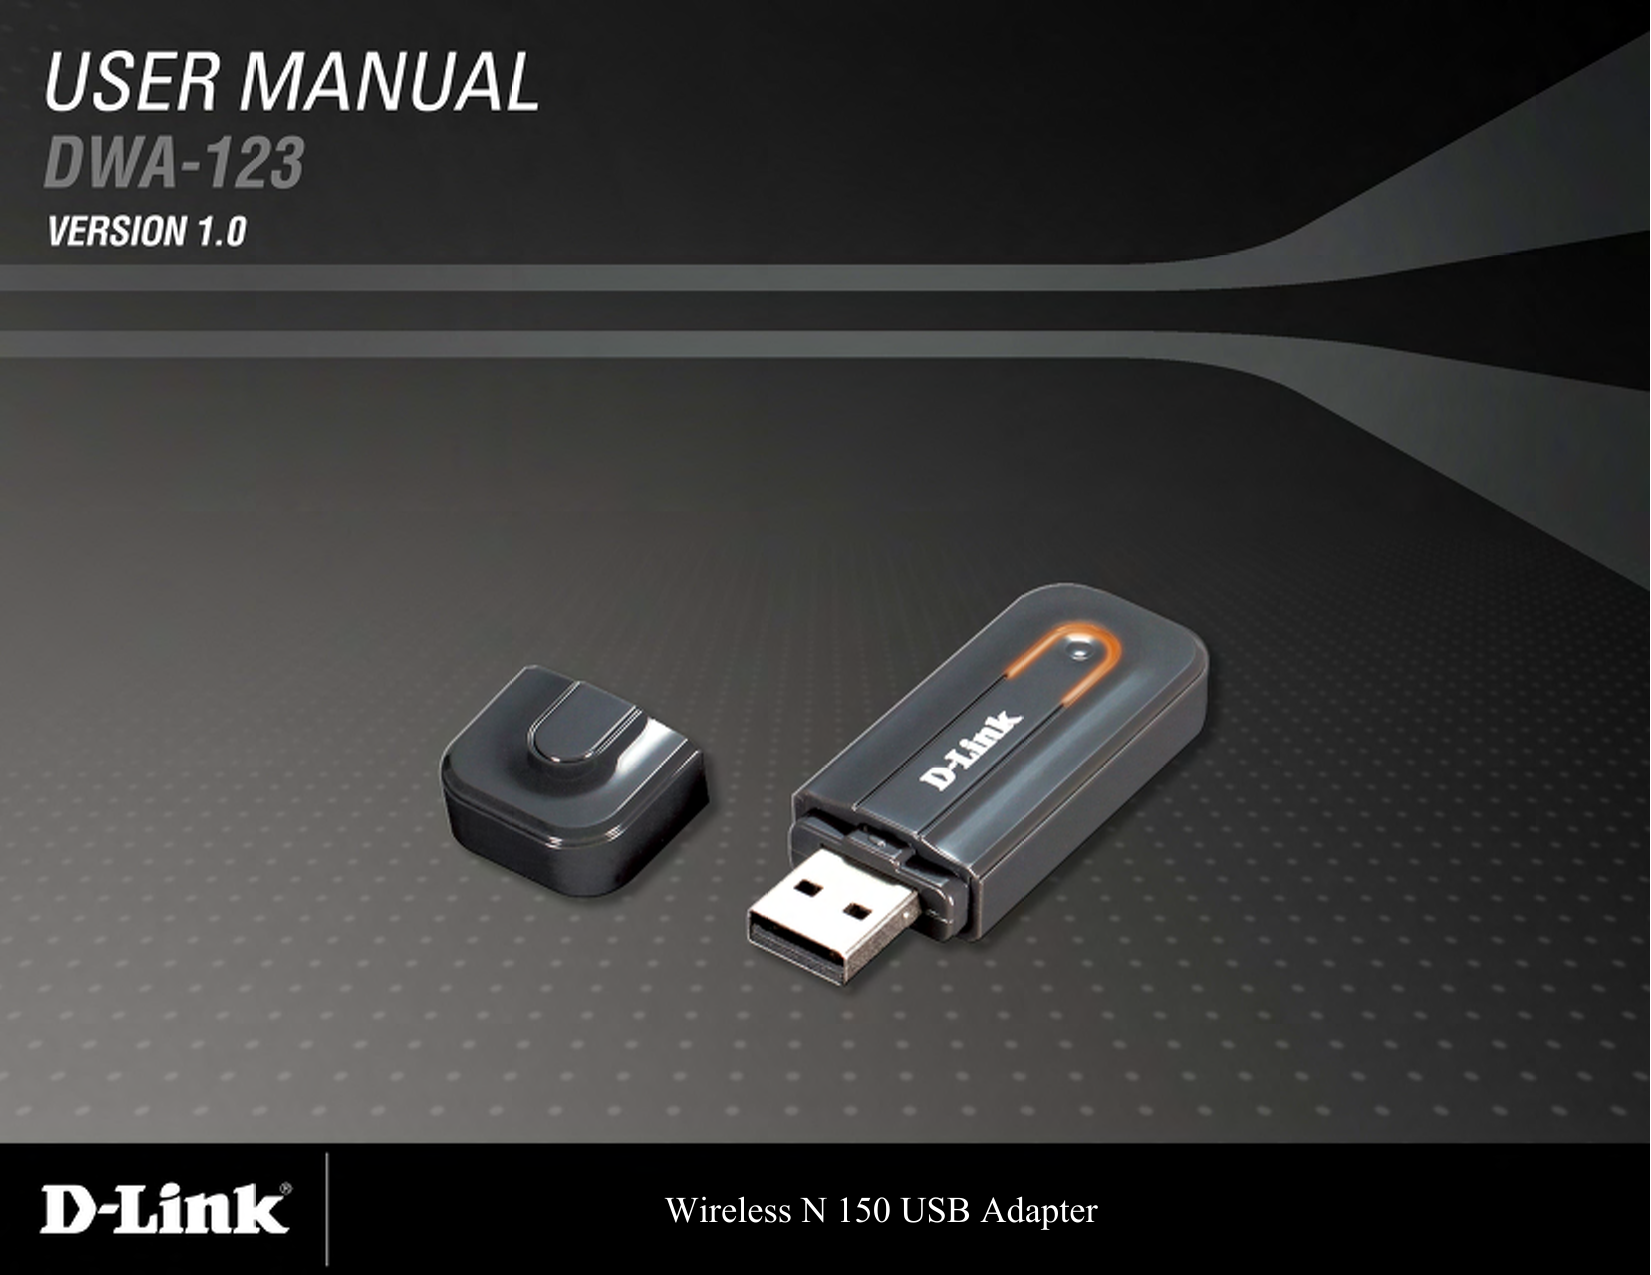 Document Created by Nick SchusterWireless N 150 USB Adapter